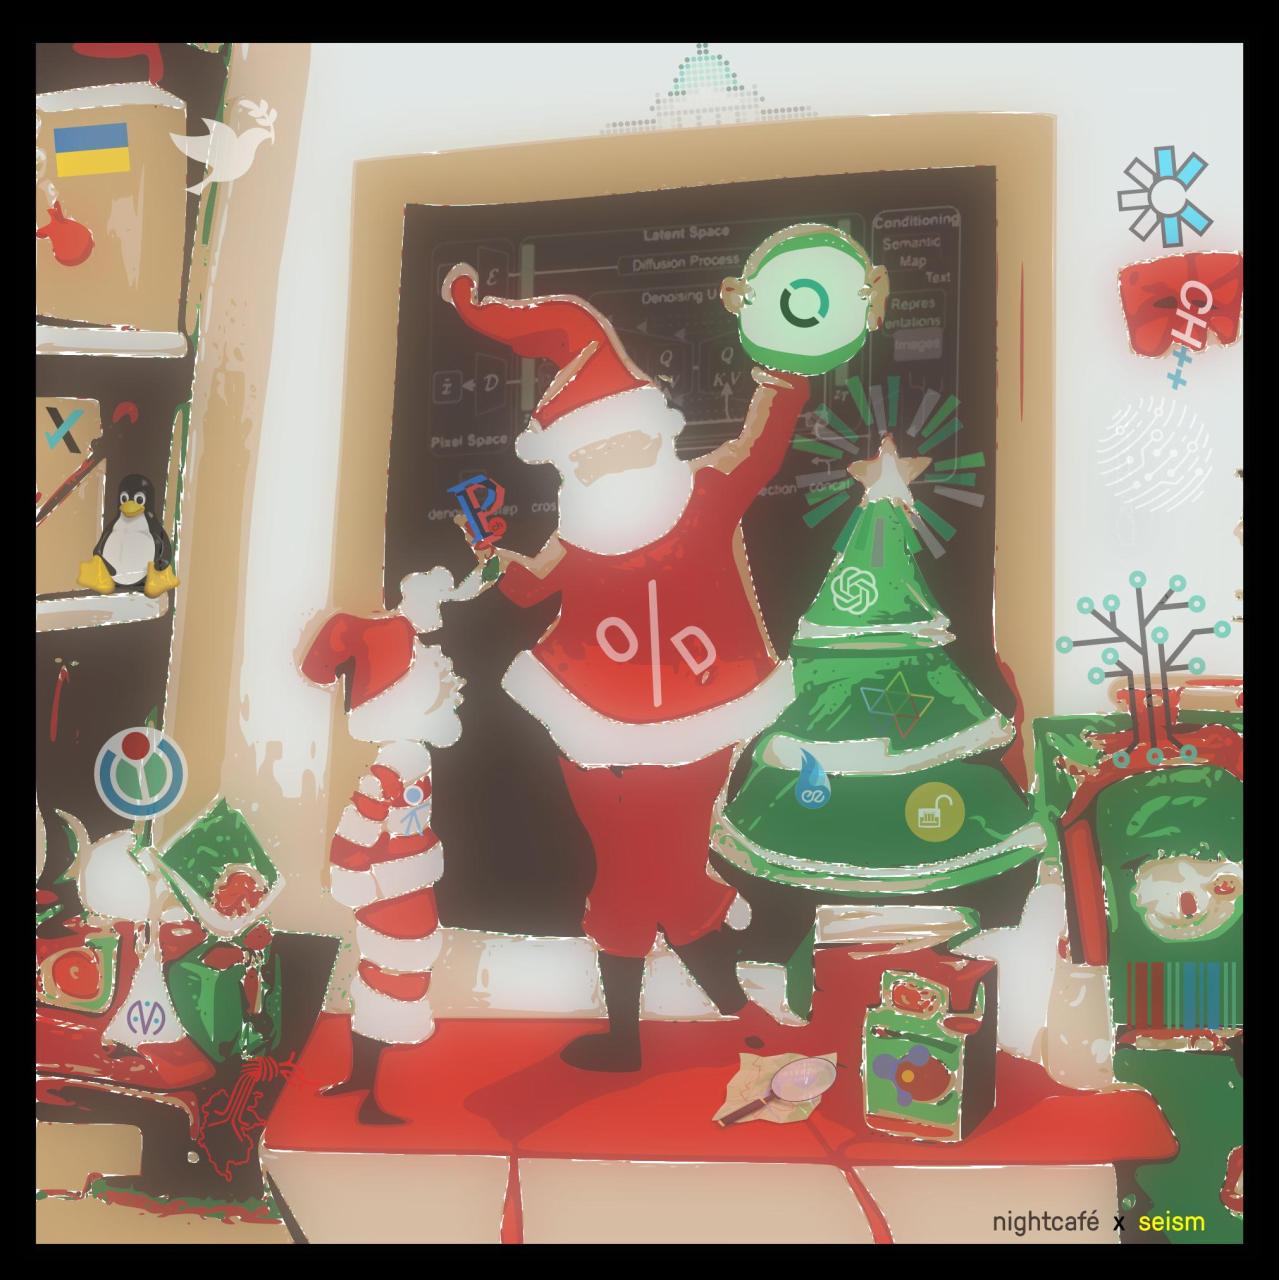 Santa's workshop, with an elf being tutored at the blackboard while another dances in the corner. Packages, gifts, and a christmas tree, with symbols of civic institutions throughout.